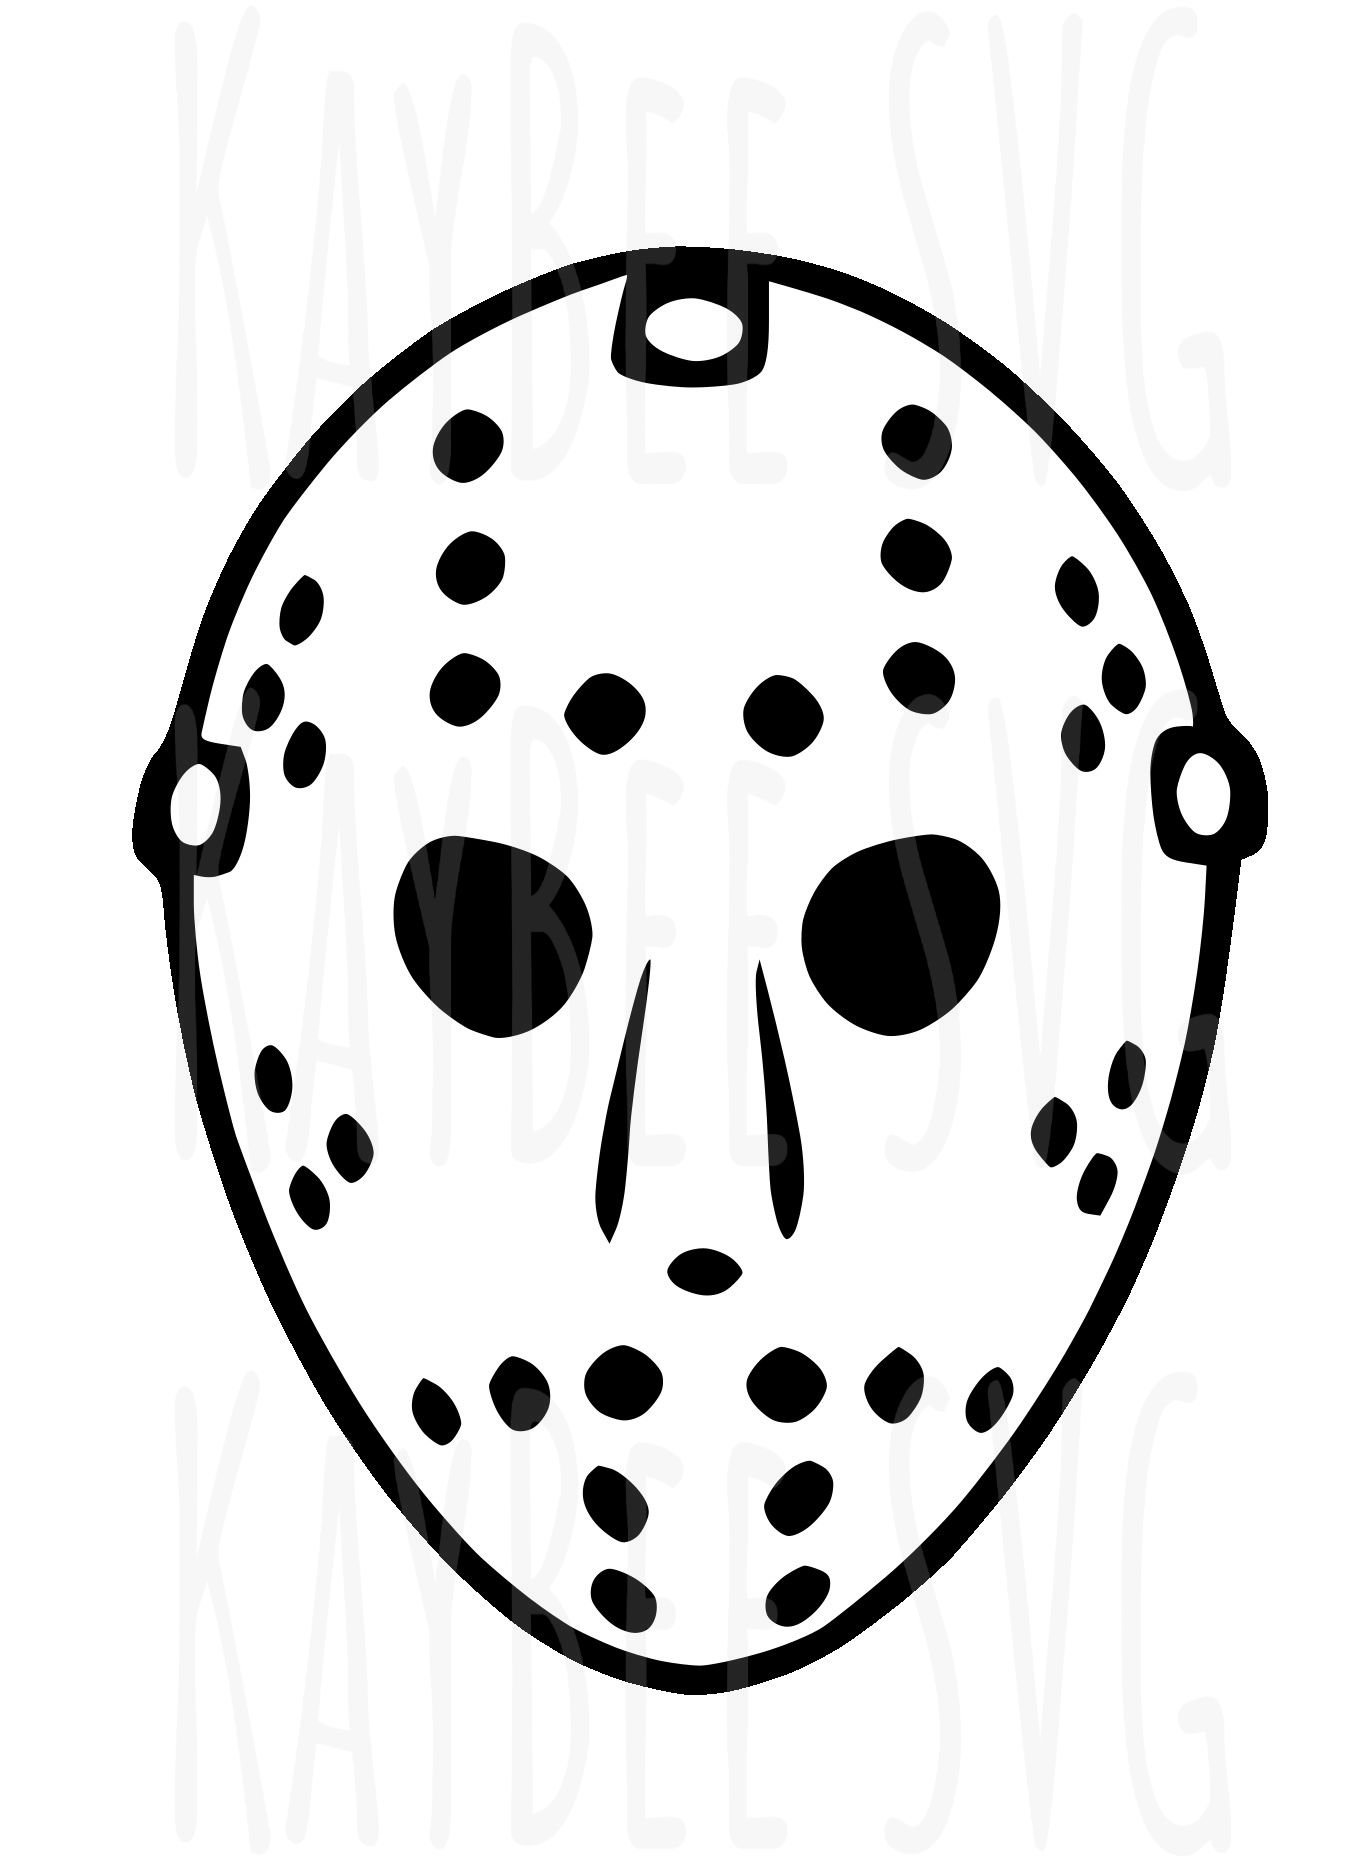 Hockey Mask Clipart, Transparent PNG Clipart Images Free Download